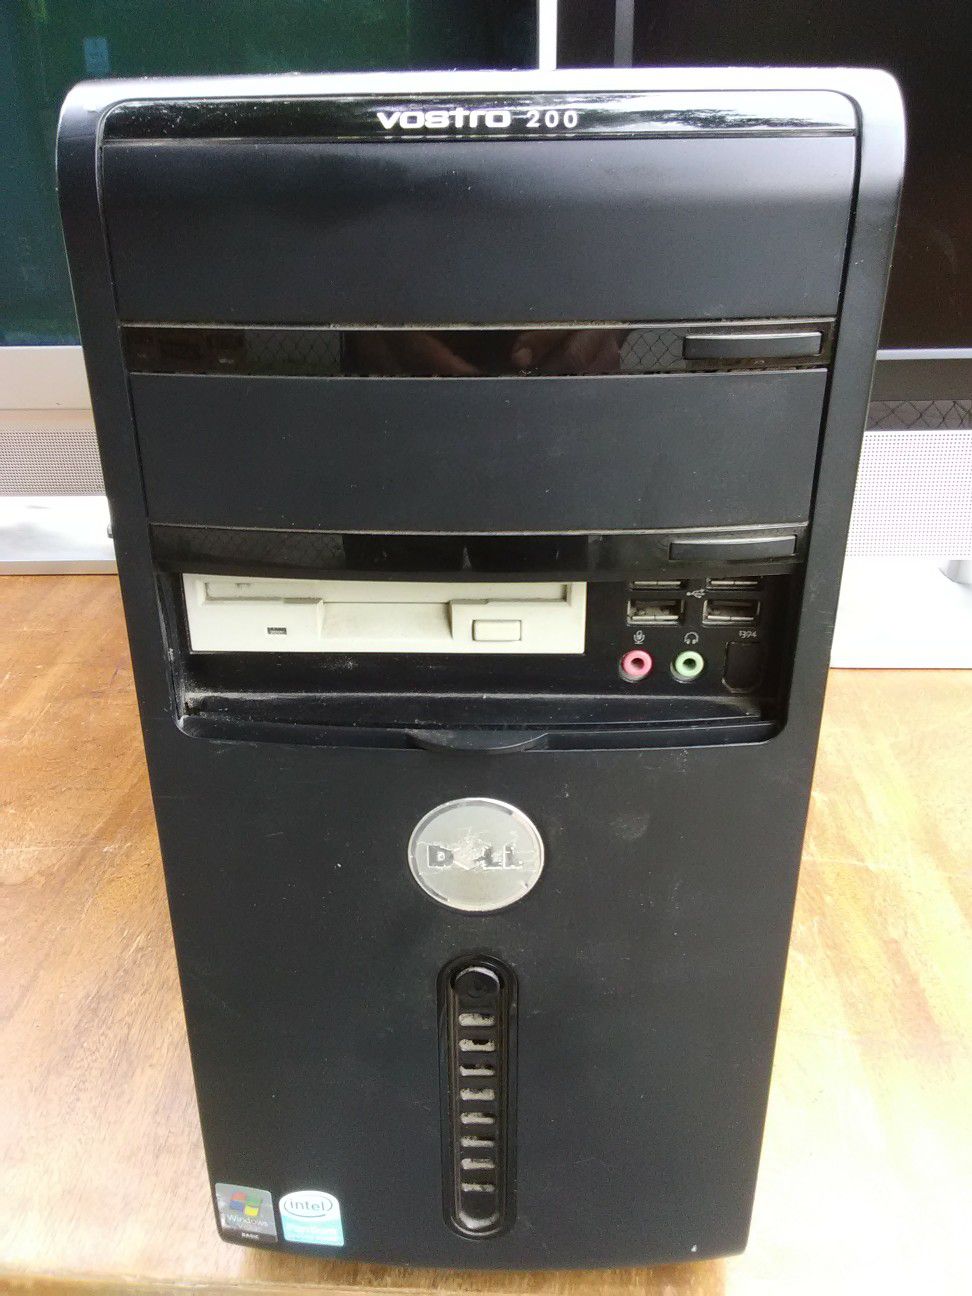 Dell Vostro desktop computer with no hard drives included